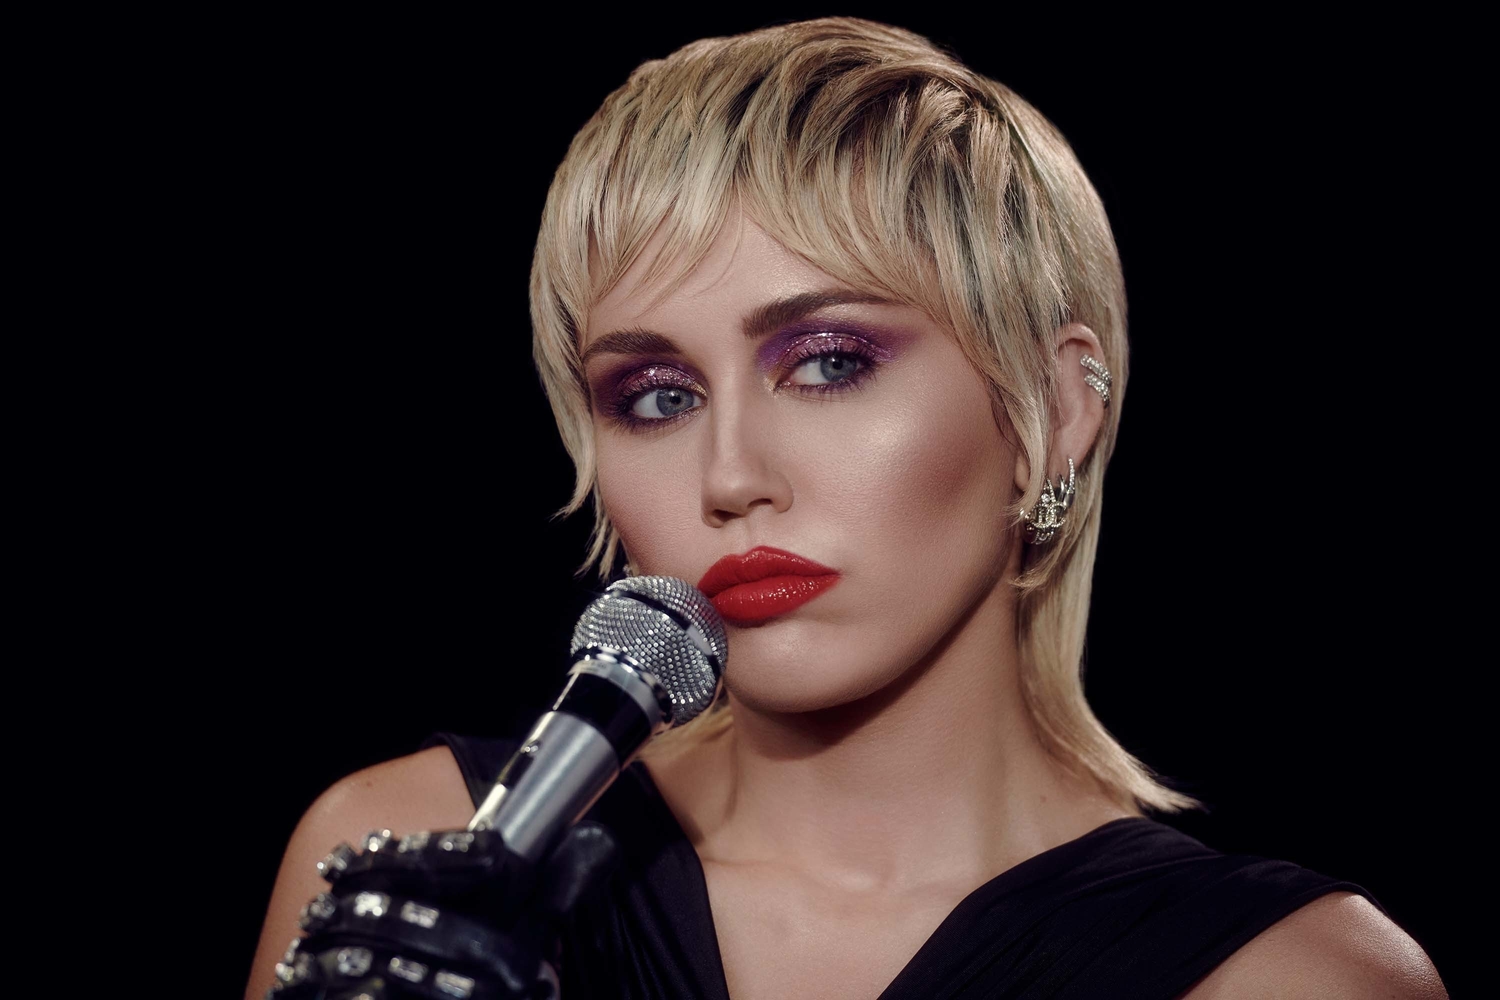 Tracks: Miley Cyrus, The Cribs, The Japanese House and more